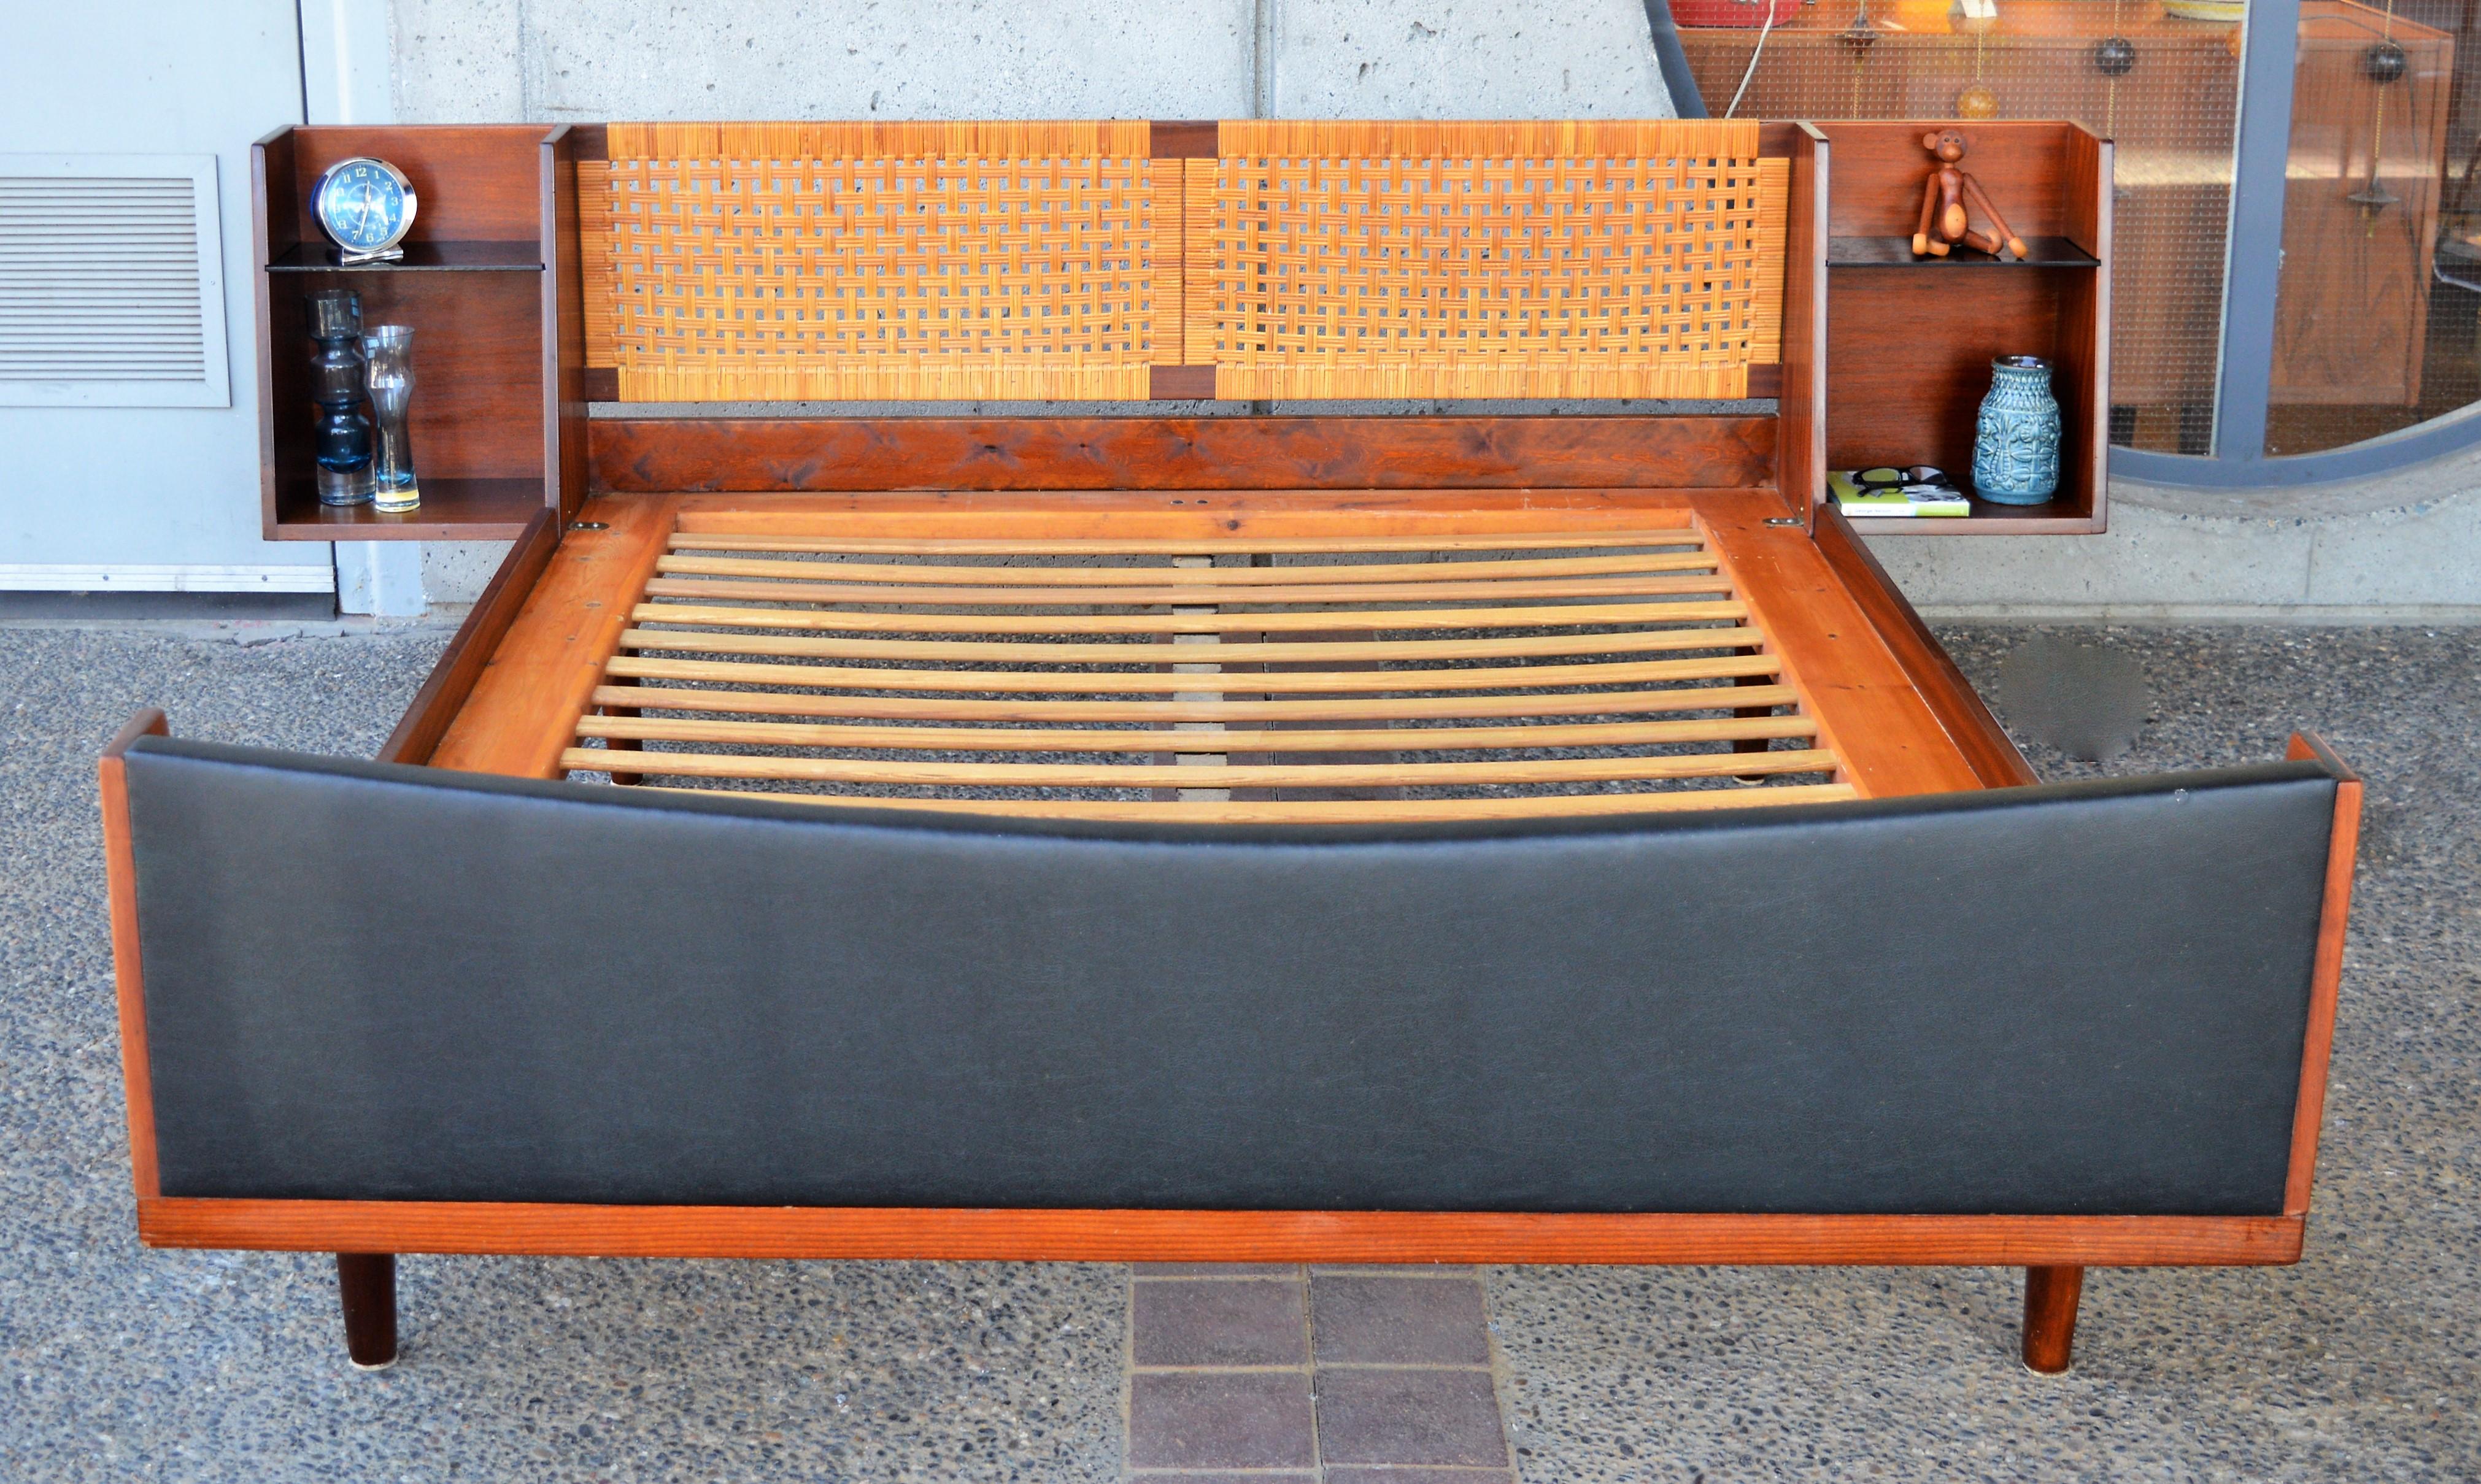 This spectacular and rare Danish modern teak quality bed was designed by Hans Wegner for GETAMA in the 1960s. Featuring a caned headboard with floating bedside tables on either side. The bedside tables taper back towards the top - a feature echoed